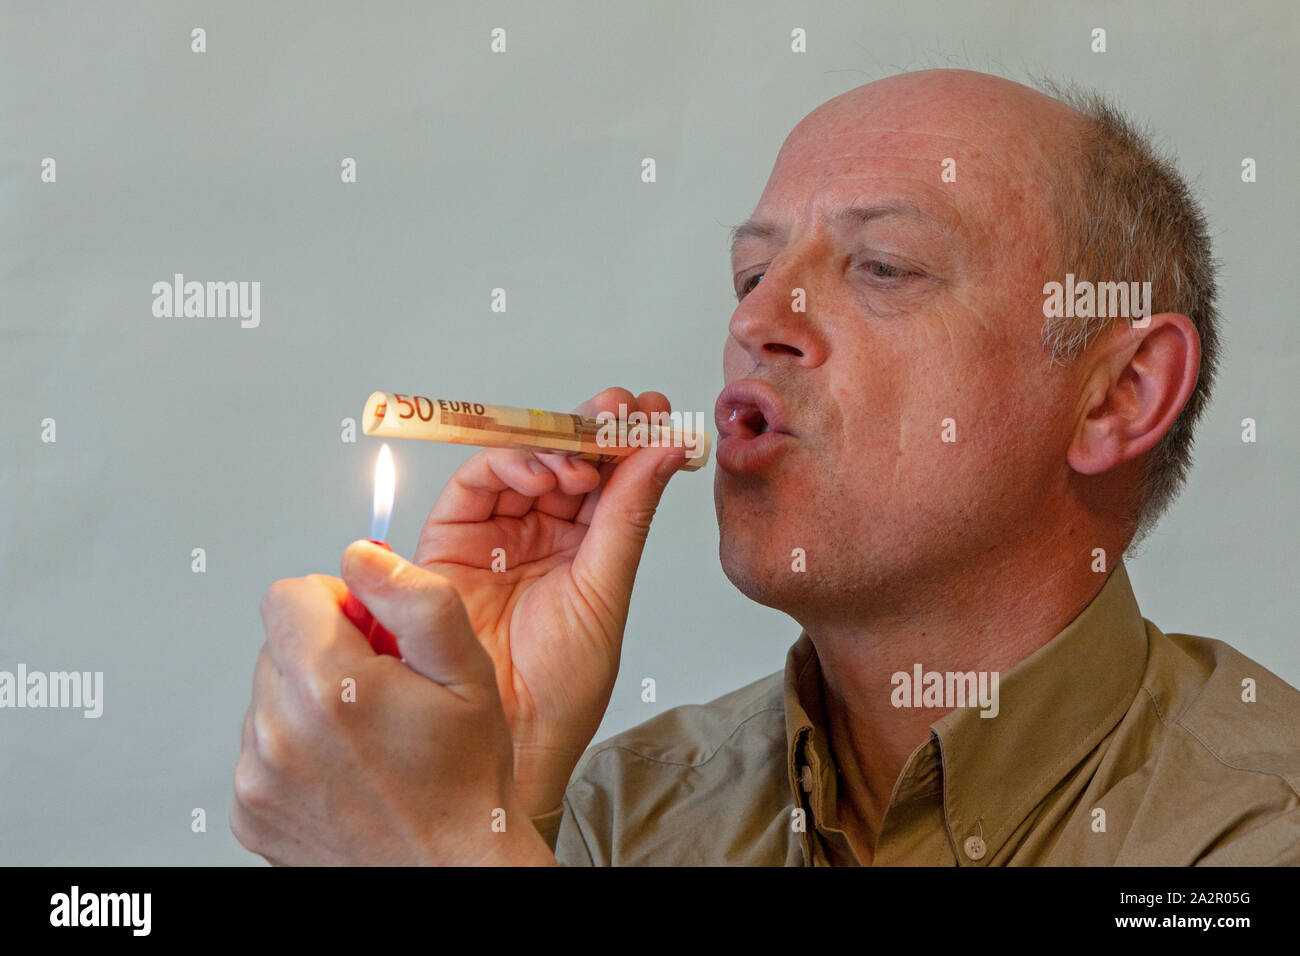 A man is smoking a 50 Euro note. Stock Photo